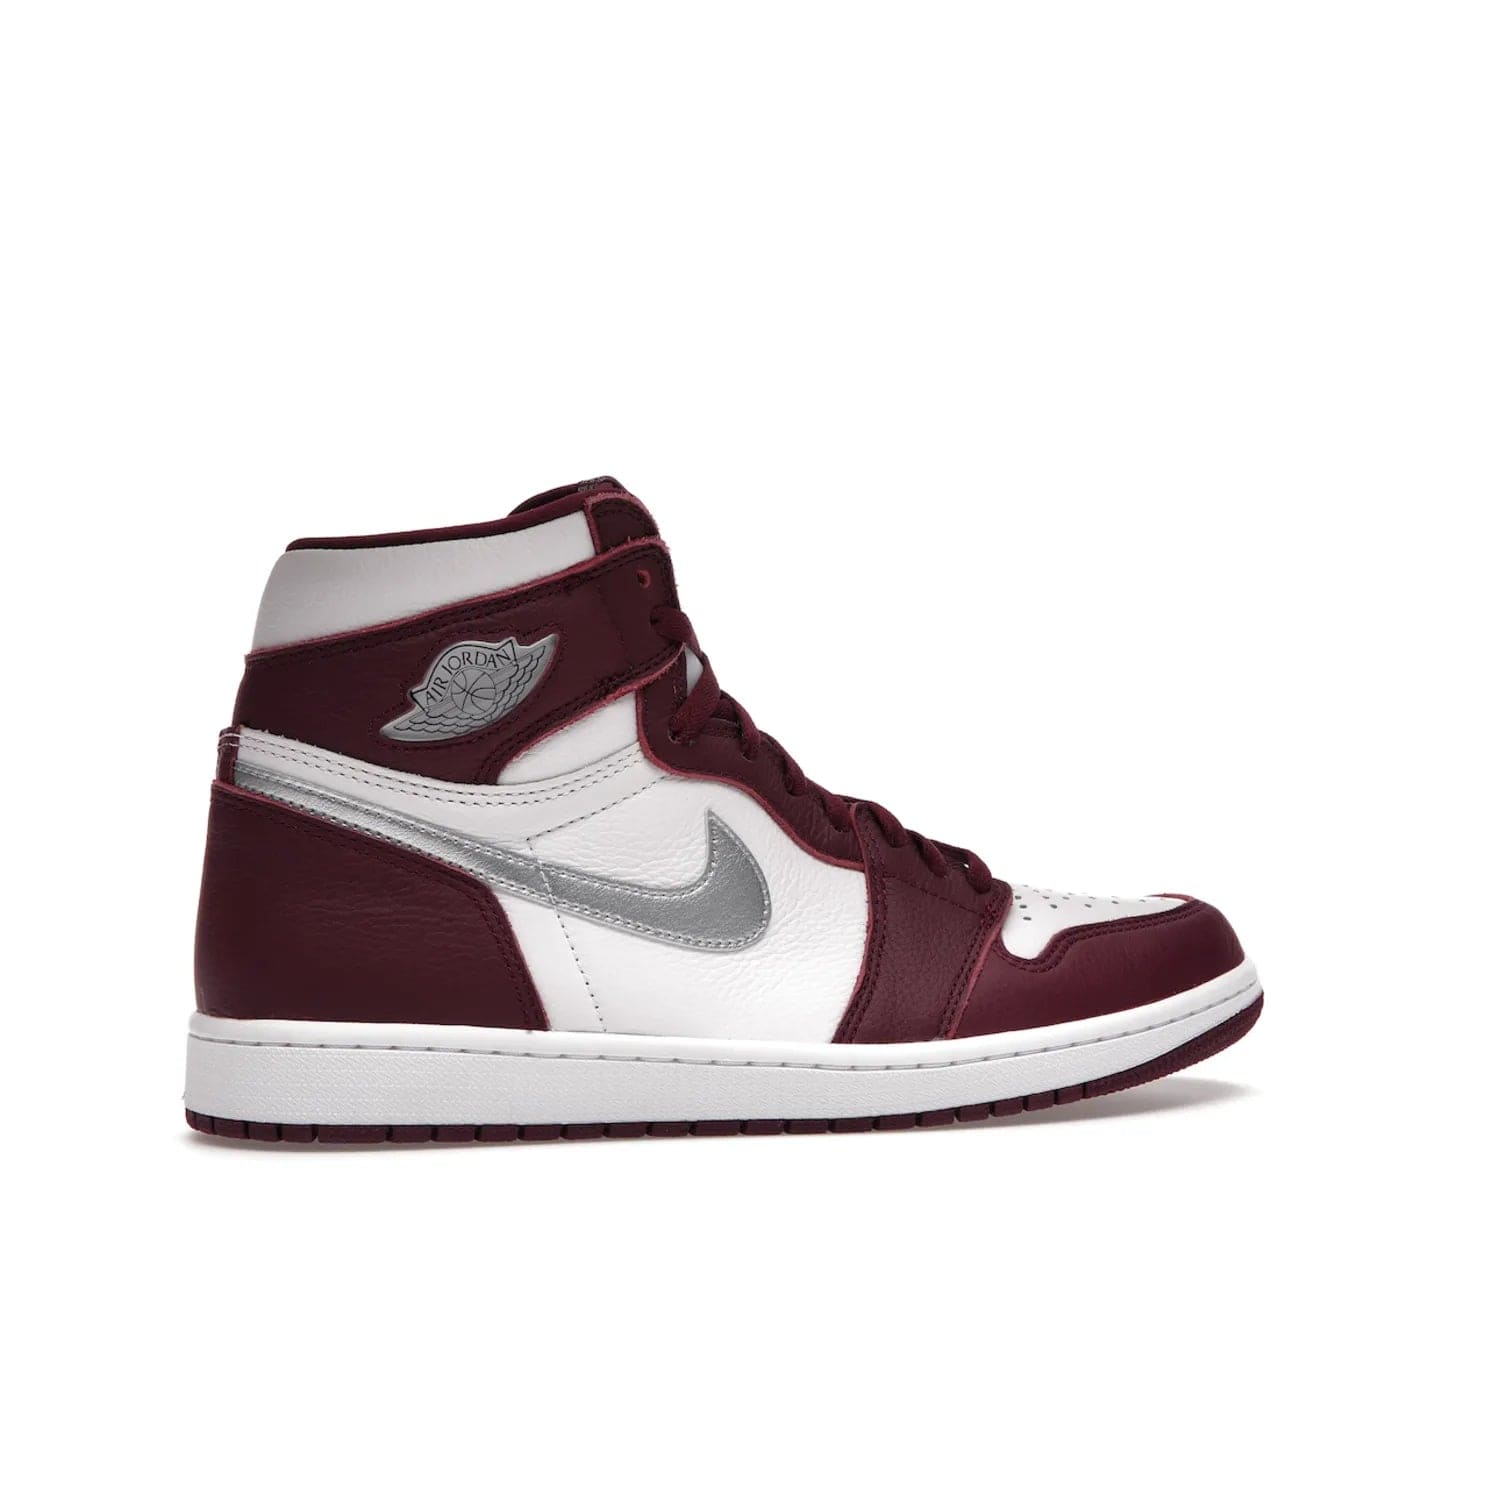 Jordan 1 Retro High OG Bordeaux - Image 35 - Only at www.BallersClubKickz.com - Shop the classic Air Jordan 1 High Bordeaux with a modern high-top cut. The timeless Bordeaux and White-Metallic Silver colorway, releasing Nov 20, 2021, is perfect for practice or a night out.